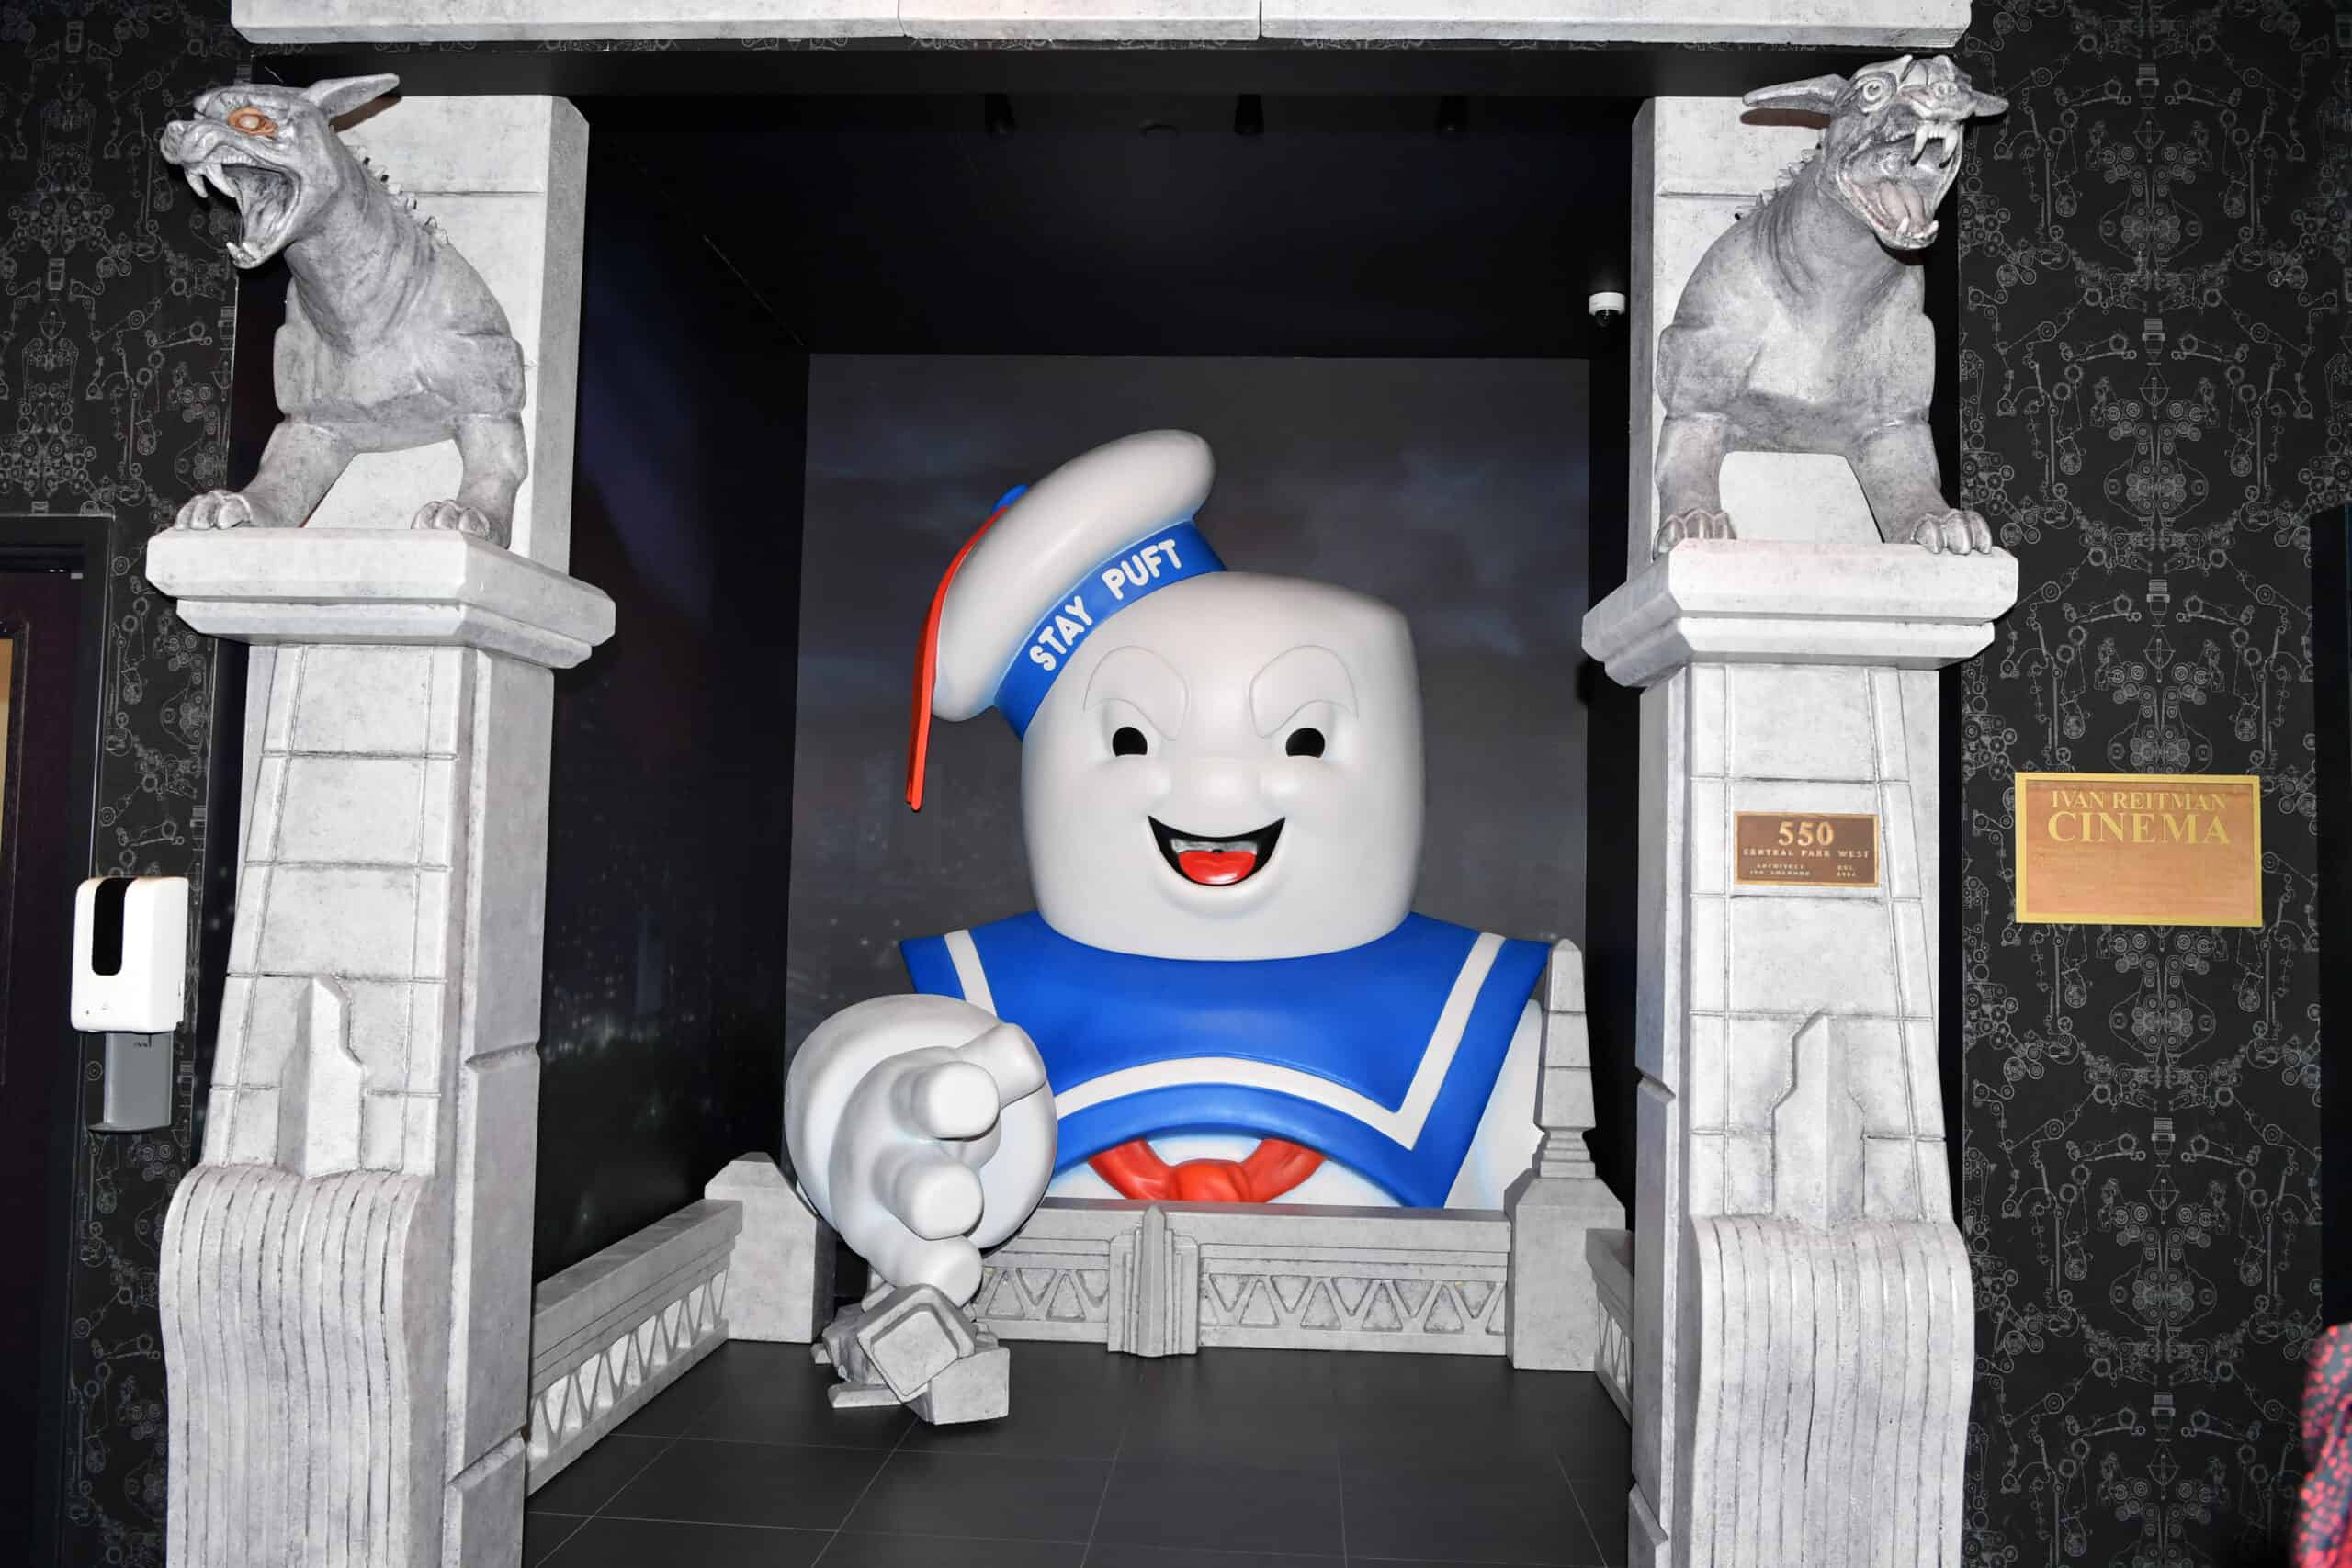 Alamo Drafthouse Dedicates New Manhattan Theater To Legendary Ghostbusters Filmmaker Ivan Reitman And Unveils "Life-Sized" Stay-Puft Marshmallow Man Installation In Lobby